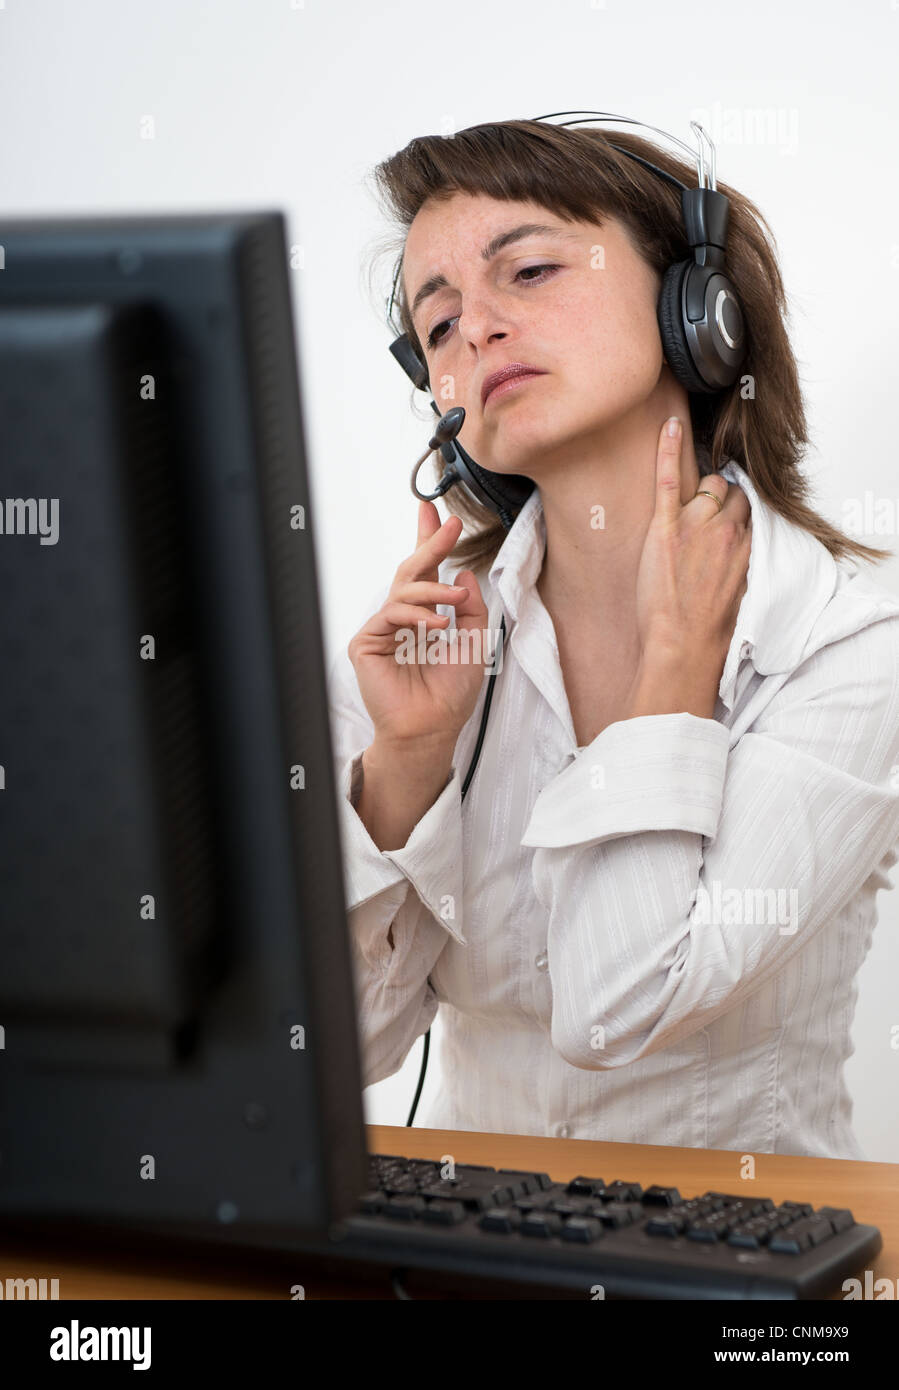 Young business person with neck pain working at computer Stock Photo